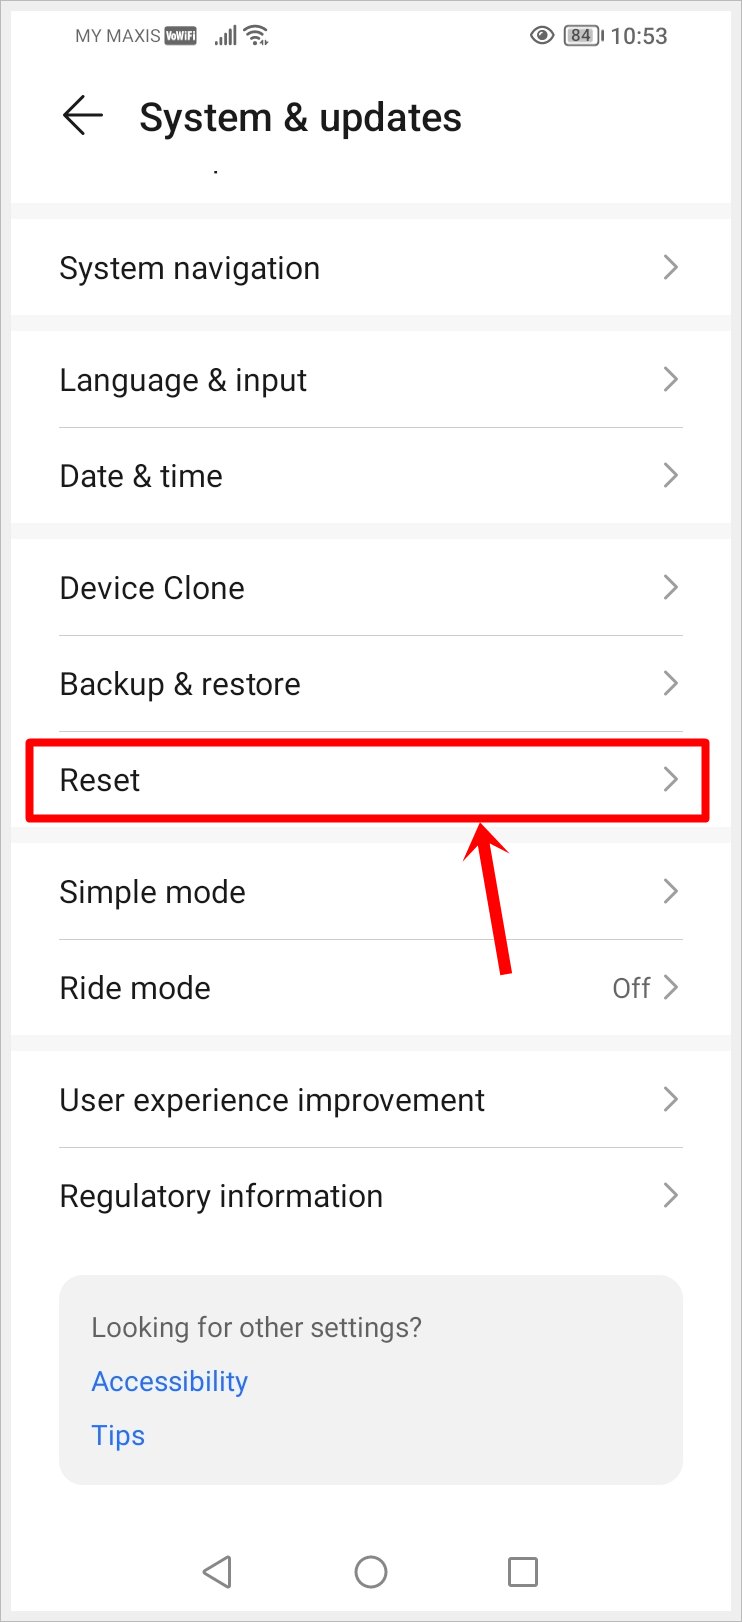 This image shows the "System & updates" page of an Android phone, with the "Reset" option highlighted.